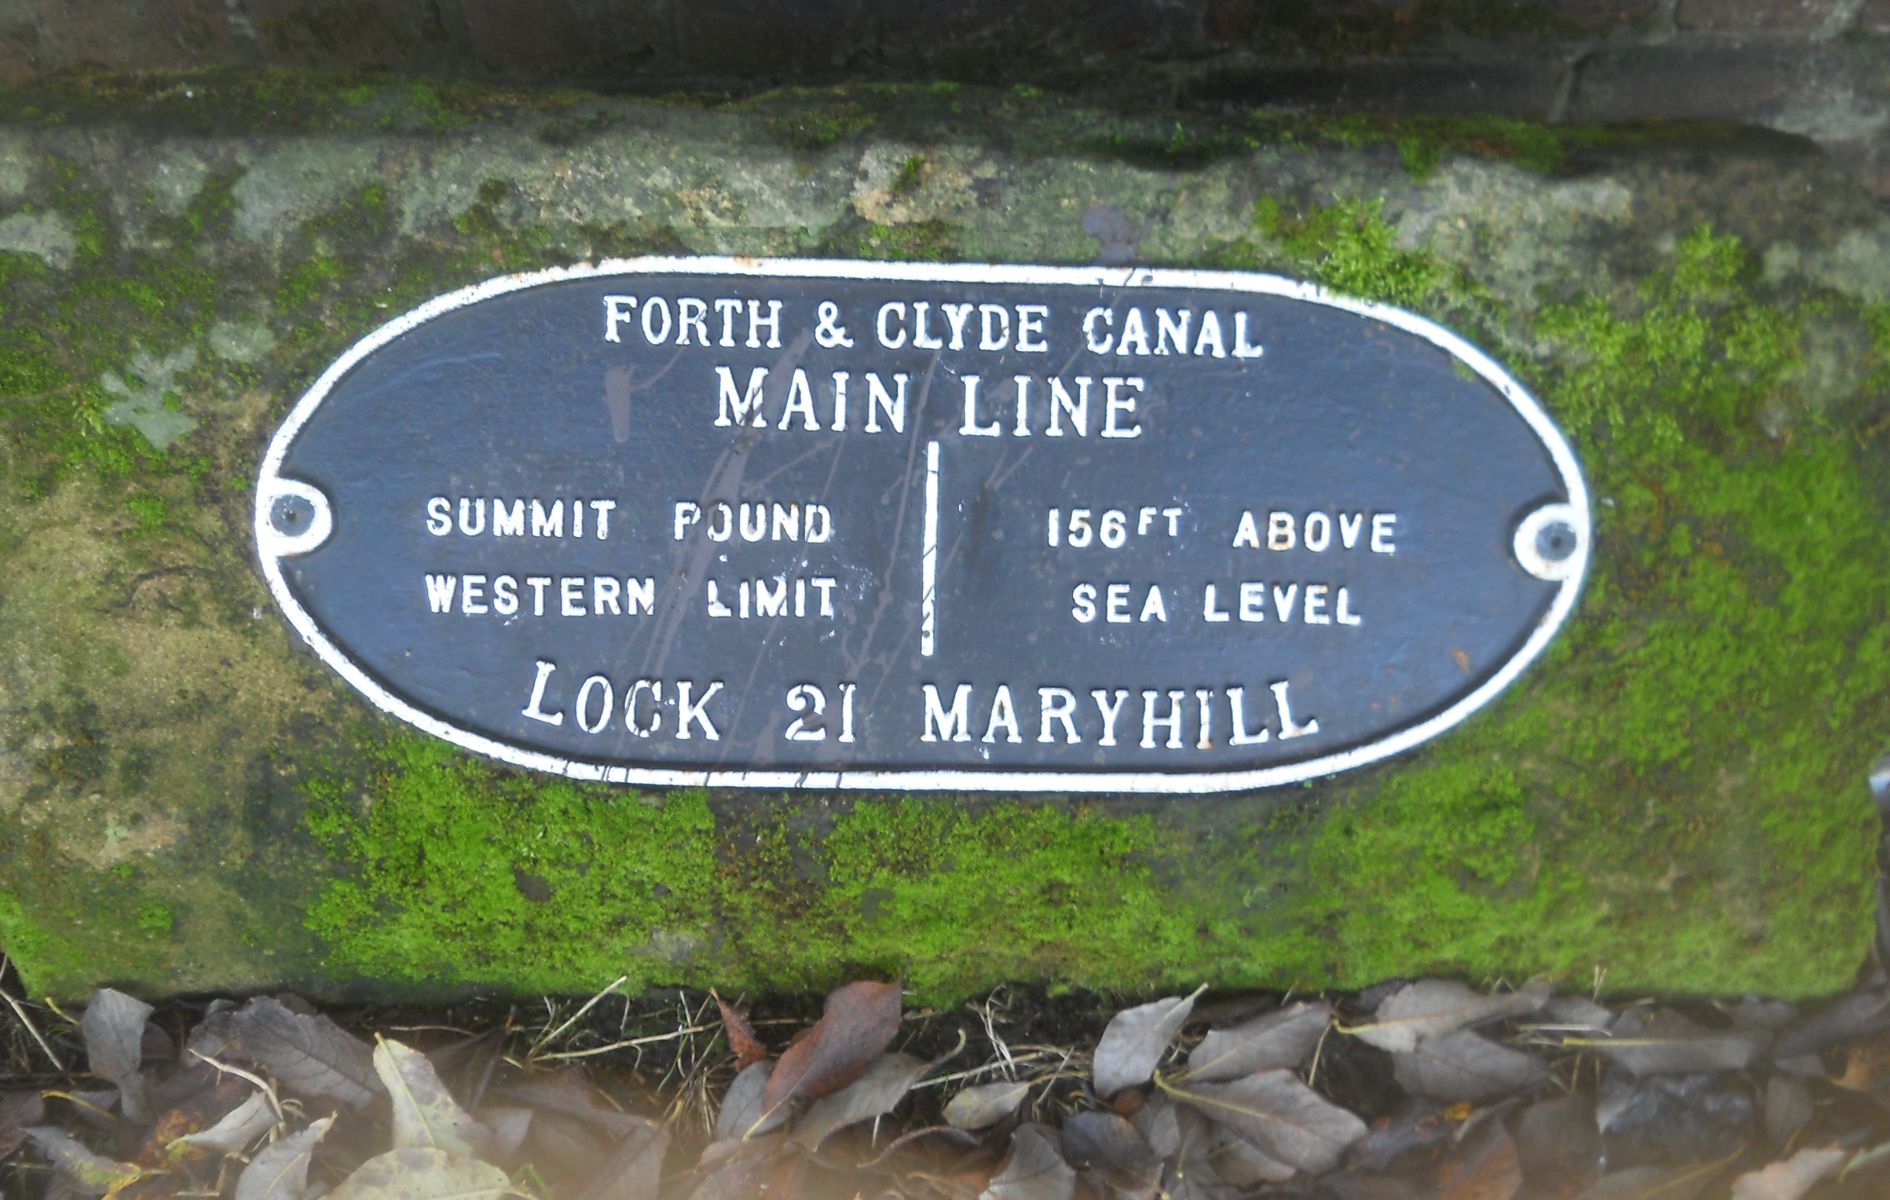 Plaque on Forth & Clyde Canal in Maryhill